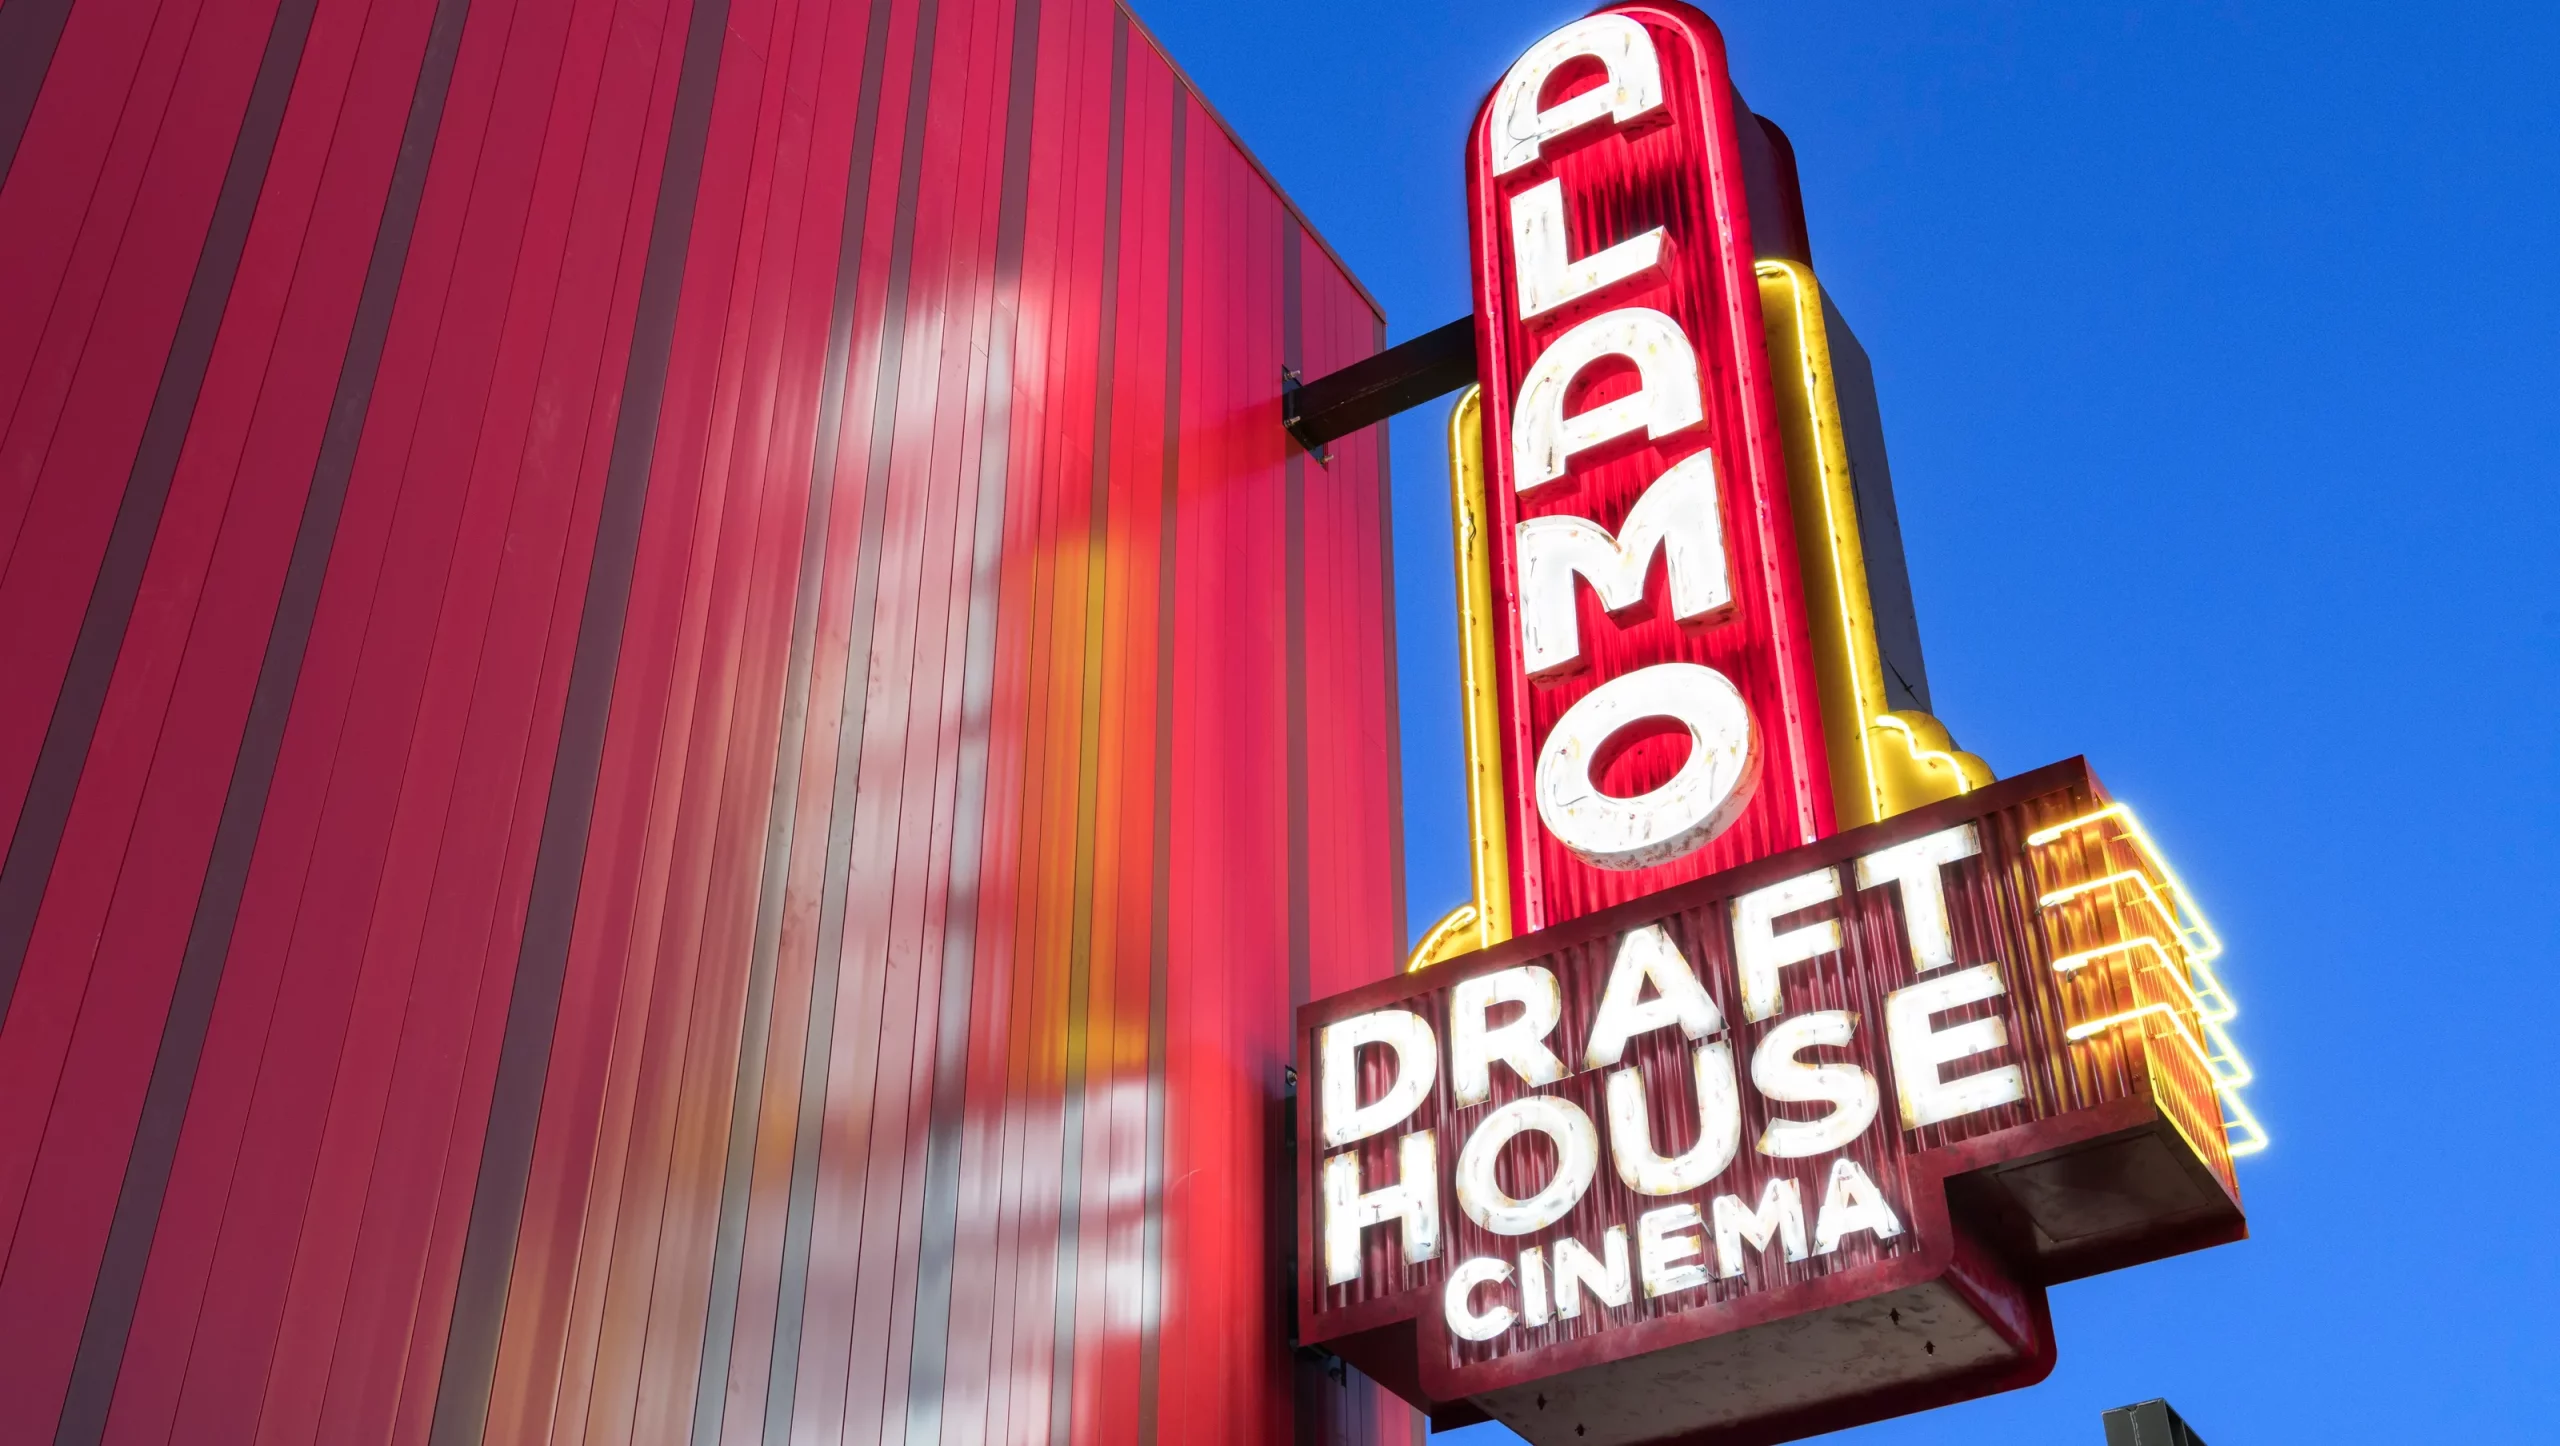 Sony Pictures Buys Alamo Drafthouse: Impact on Cinema Experience